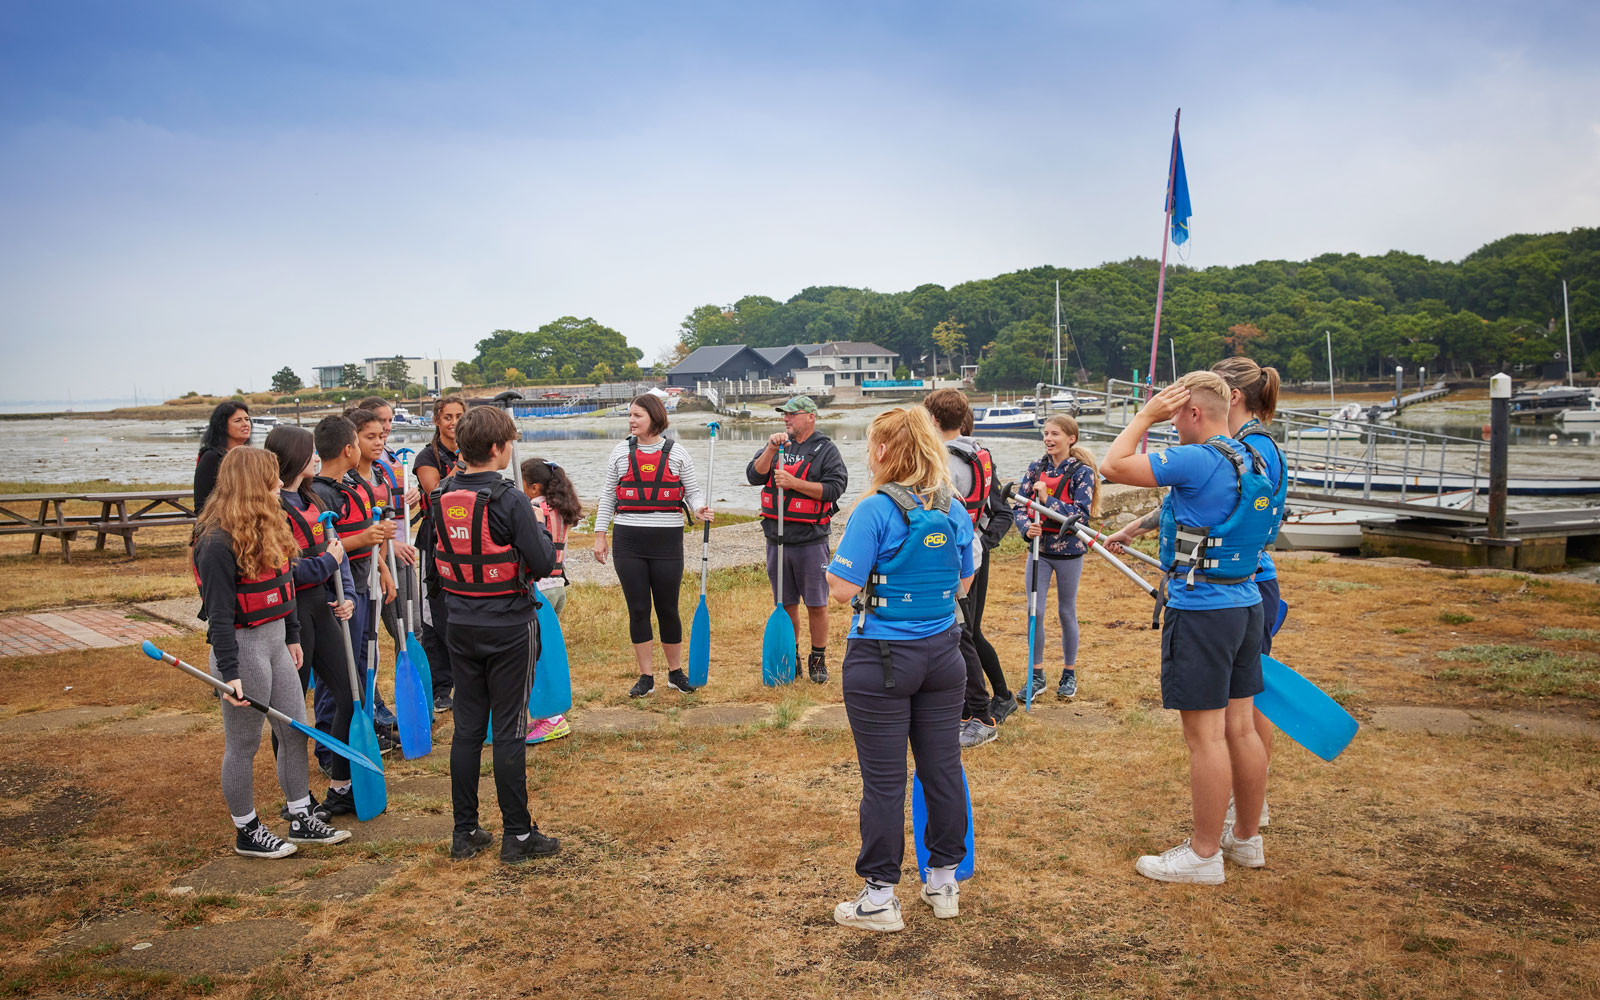 Paddle sports instructors on the Isle of Wight leading a group activity